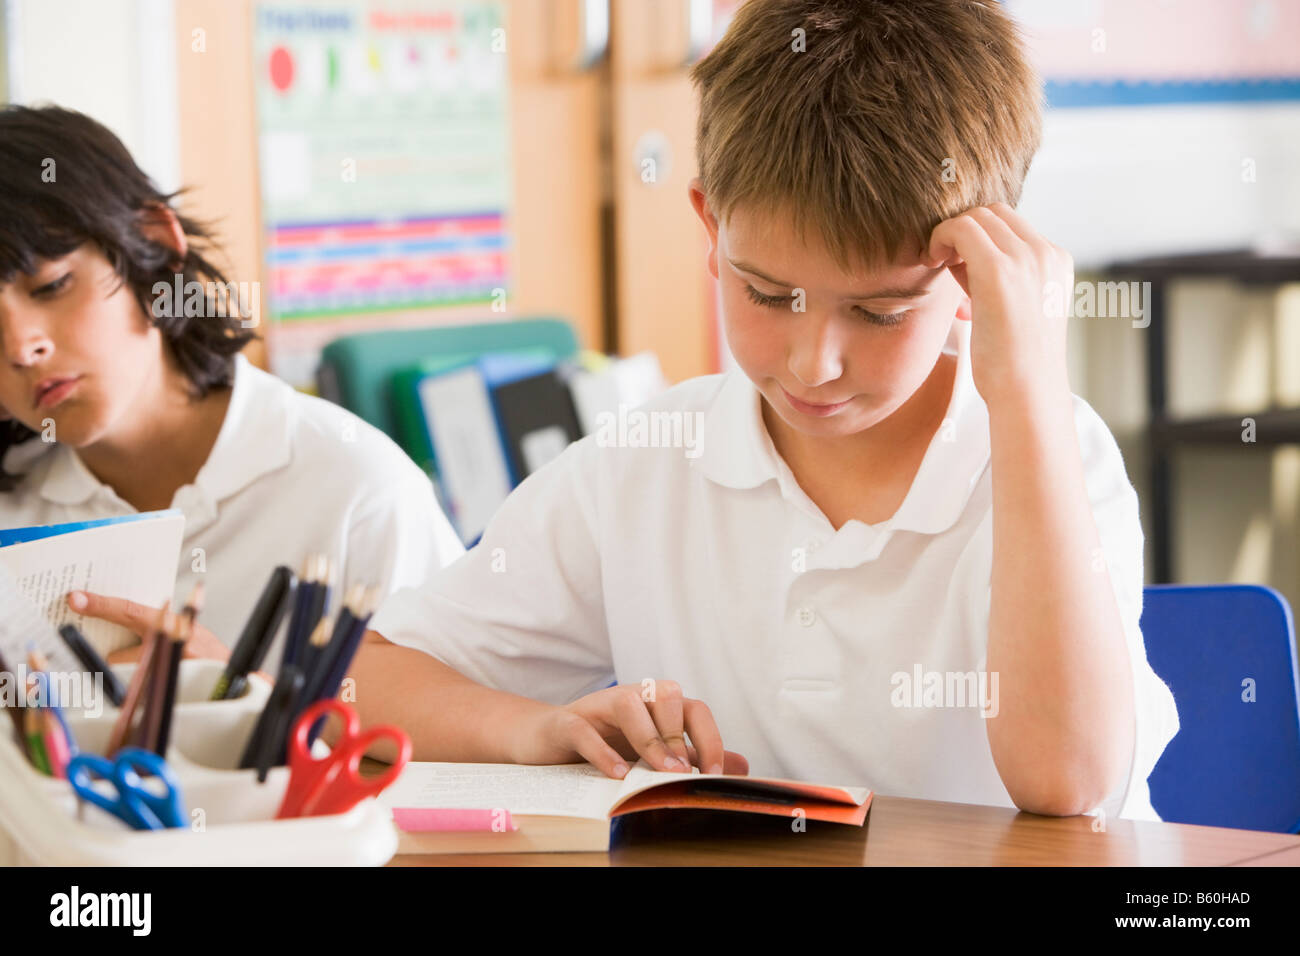 Students in class reading books Stock Photo